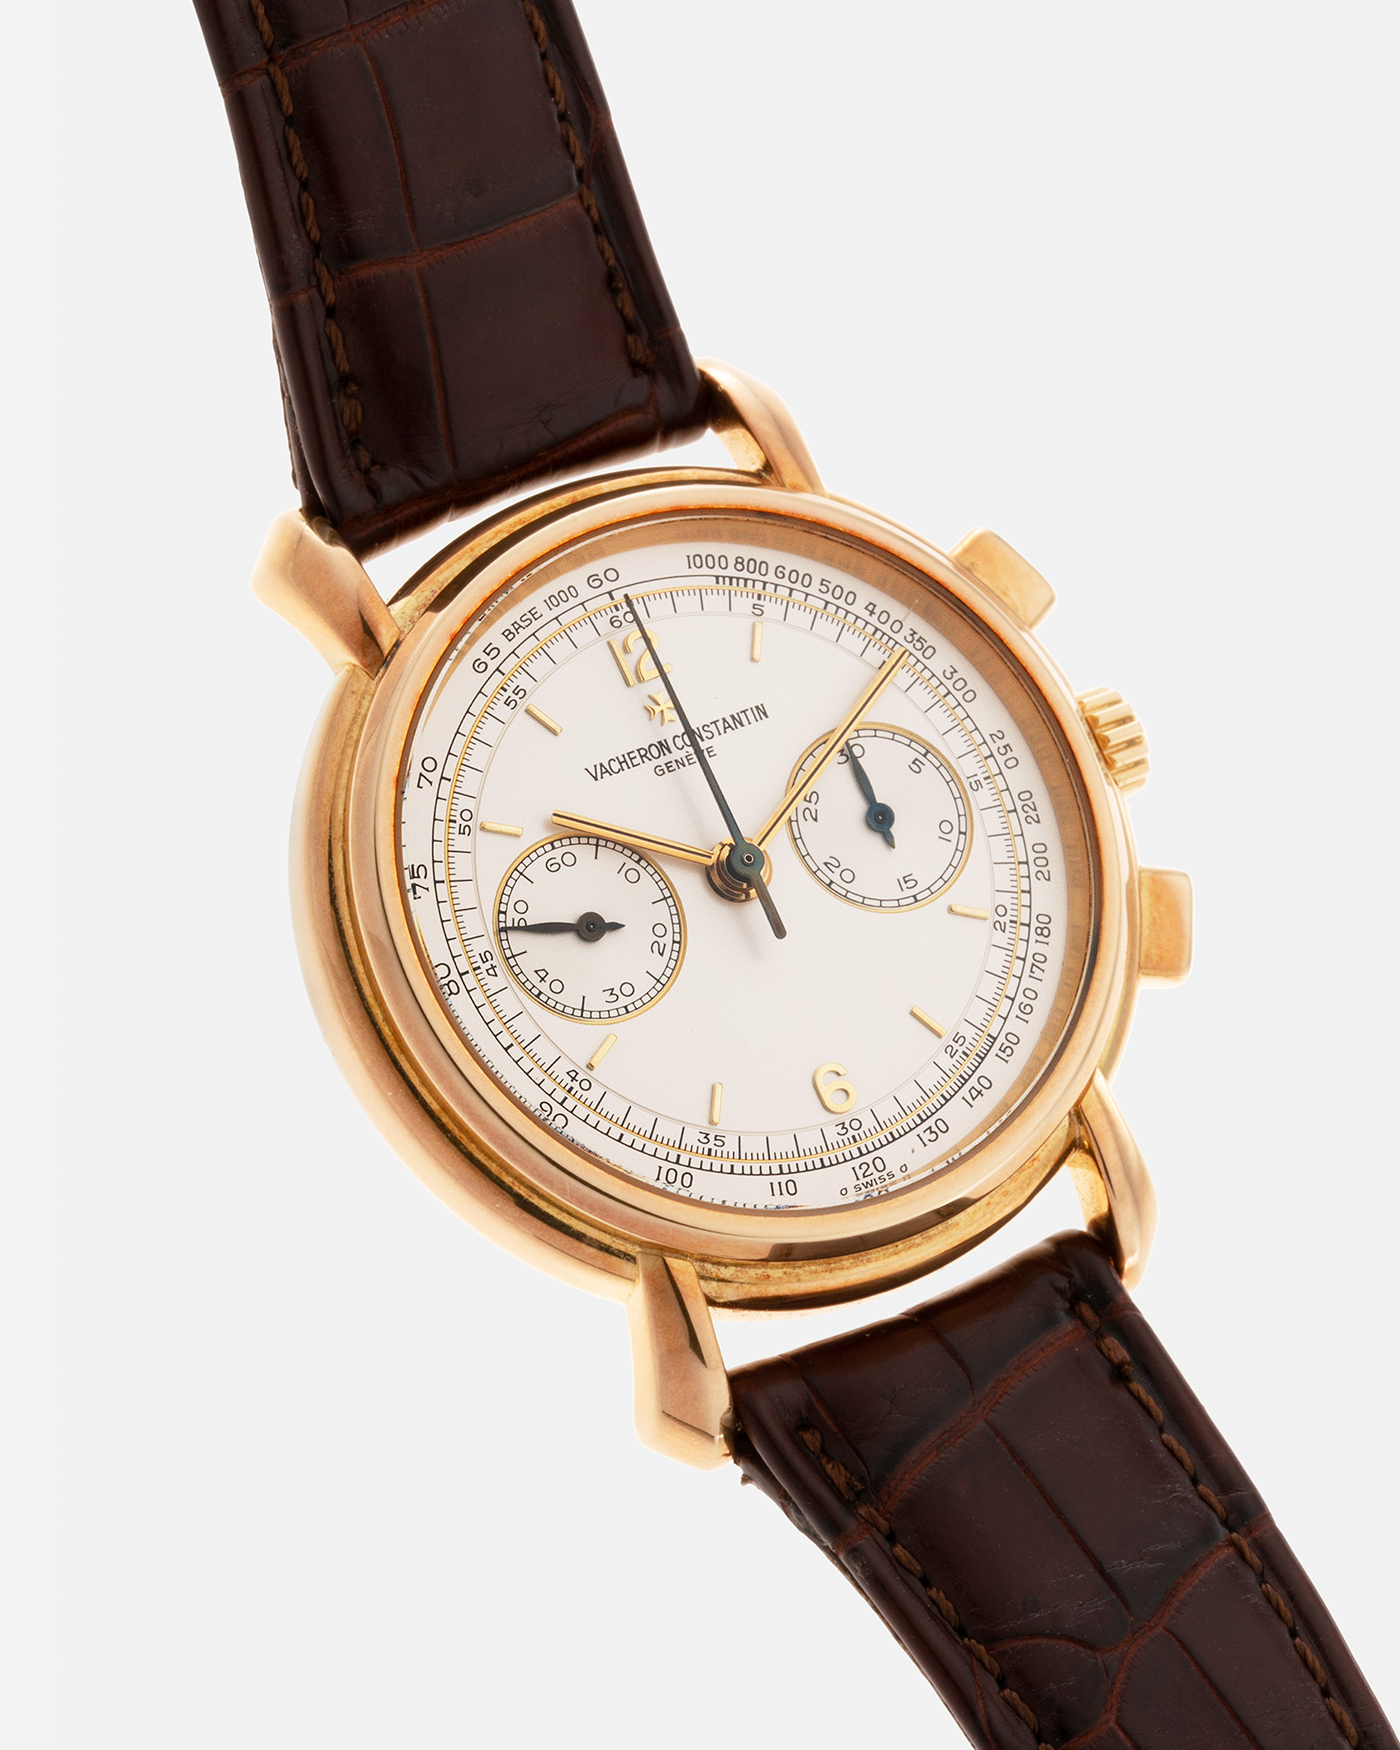 Brand: Vacheron Constantin Year: 2001 Model: Les Historiques Chronograph  Reference Number: 47101 Material: 18-carat Yellow Gold Movement: Lemania 2320 Based Cal. 1141, Manual-Winding Case Diameter: 37mm Strap: Vacheron Constantin Alligator Brown Leather Strap with Signed 18-carat Yellow Gold Tang Buckle